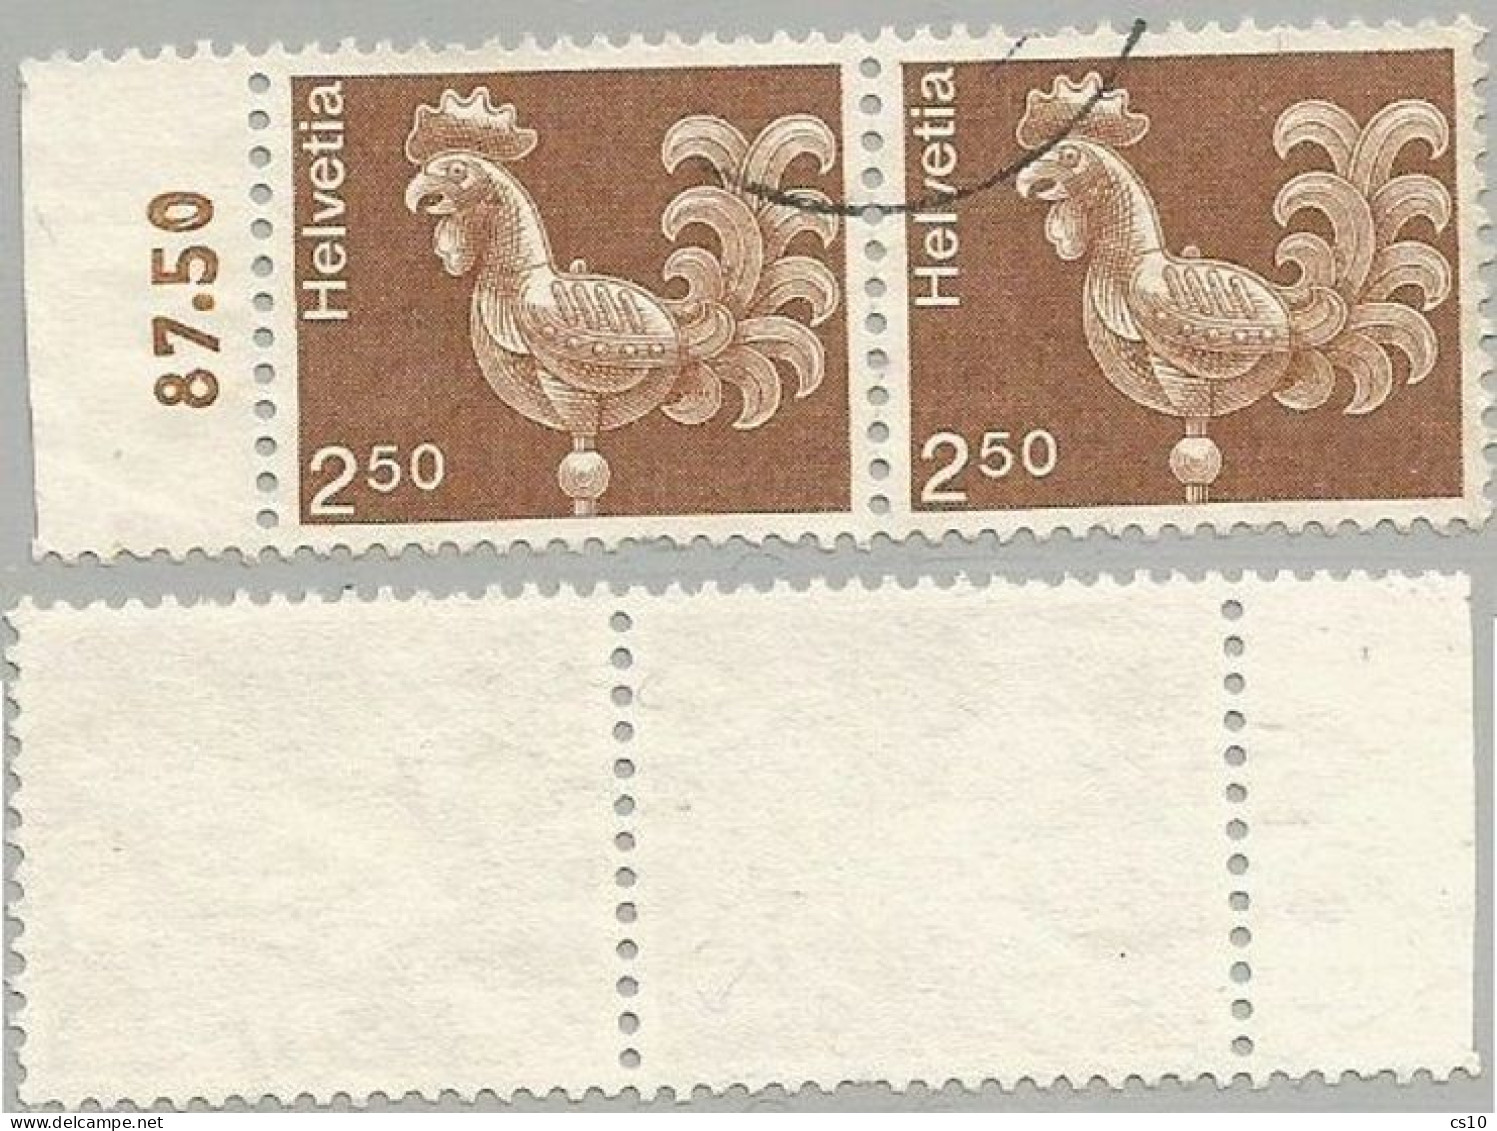 Suisse 1975 Artworks Wheatercock FS.2,50 - Scarce Variety NON FLUO PAPER - #2 Pcs In Horiz. Pair With Sheet Margin - Plaatfouten